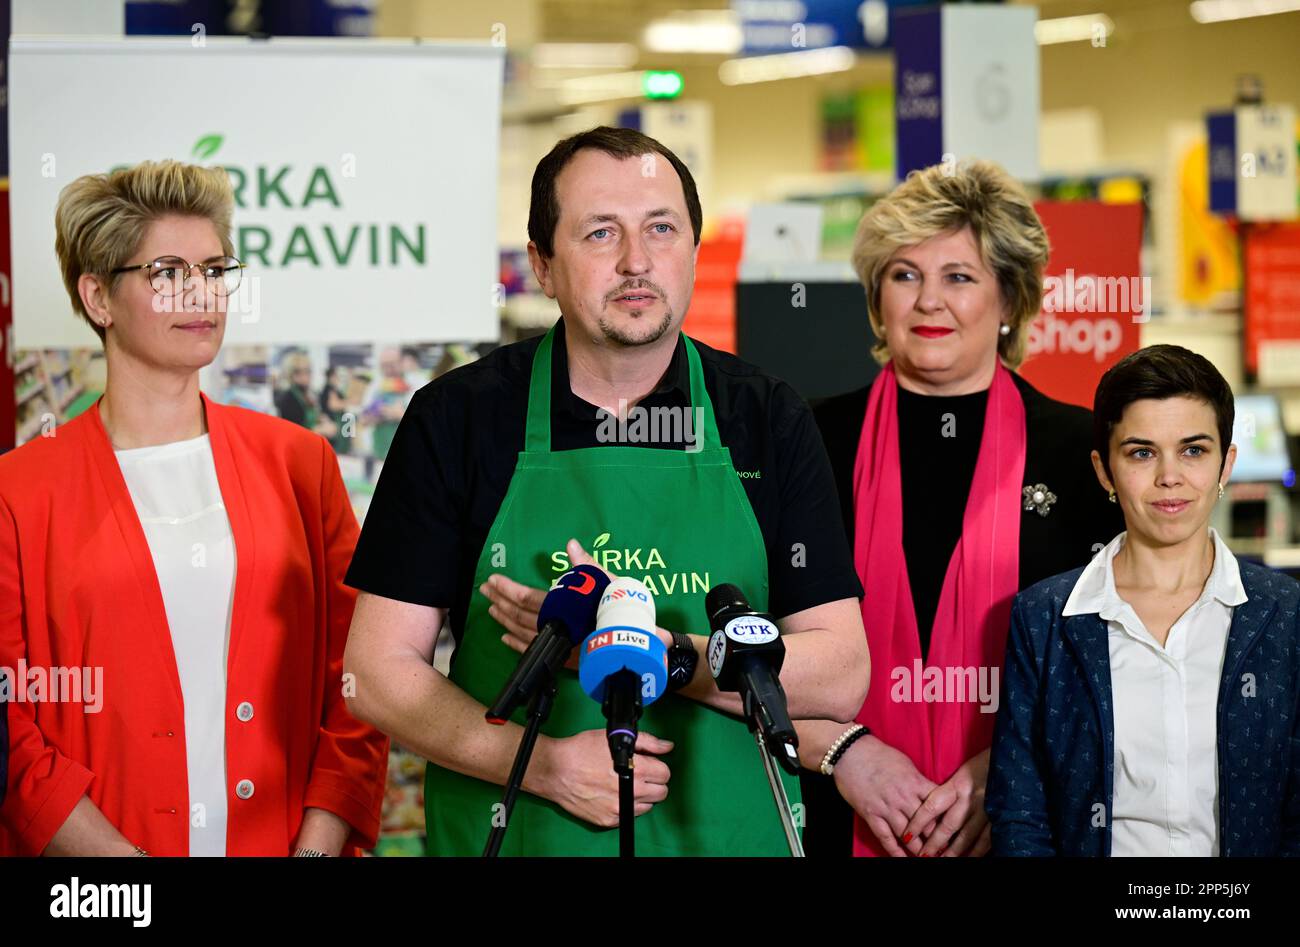 (L-R) Tesco CR CEO Katarina Navratilova, Czech Federation of Food Banks chairman Ales Slavicek, members of Czech parliament Vera Kolarova and Olga Richterova during the press conference on the occasion of the food collection in the Tesco supermarket, Prague, Czech Republic, April 22, 2023. A record number of 1,540 shops across the Czech Republic took part in the food collection. Compared to previous years, this is hundreds more, and more volunteers are joining the collection. The collected food will go via food banks to single mothers, lonely seniors, handicapped people and other people in nee Stock Photo